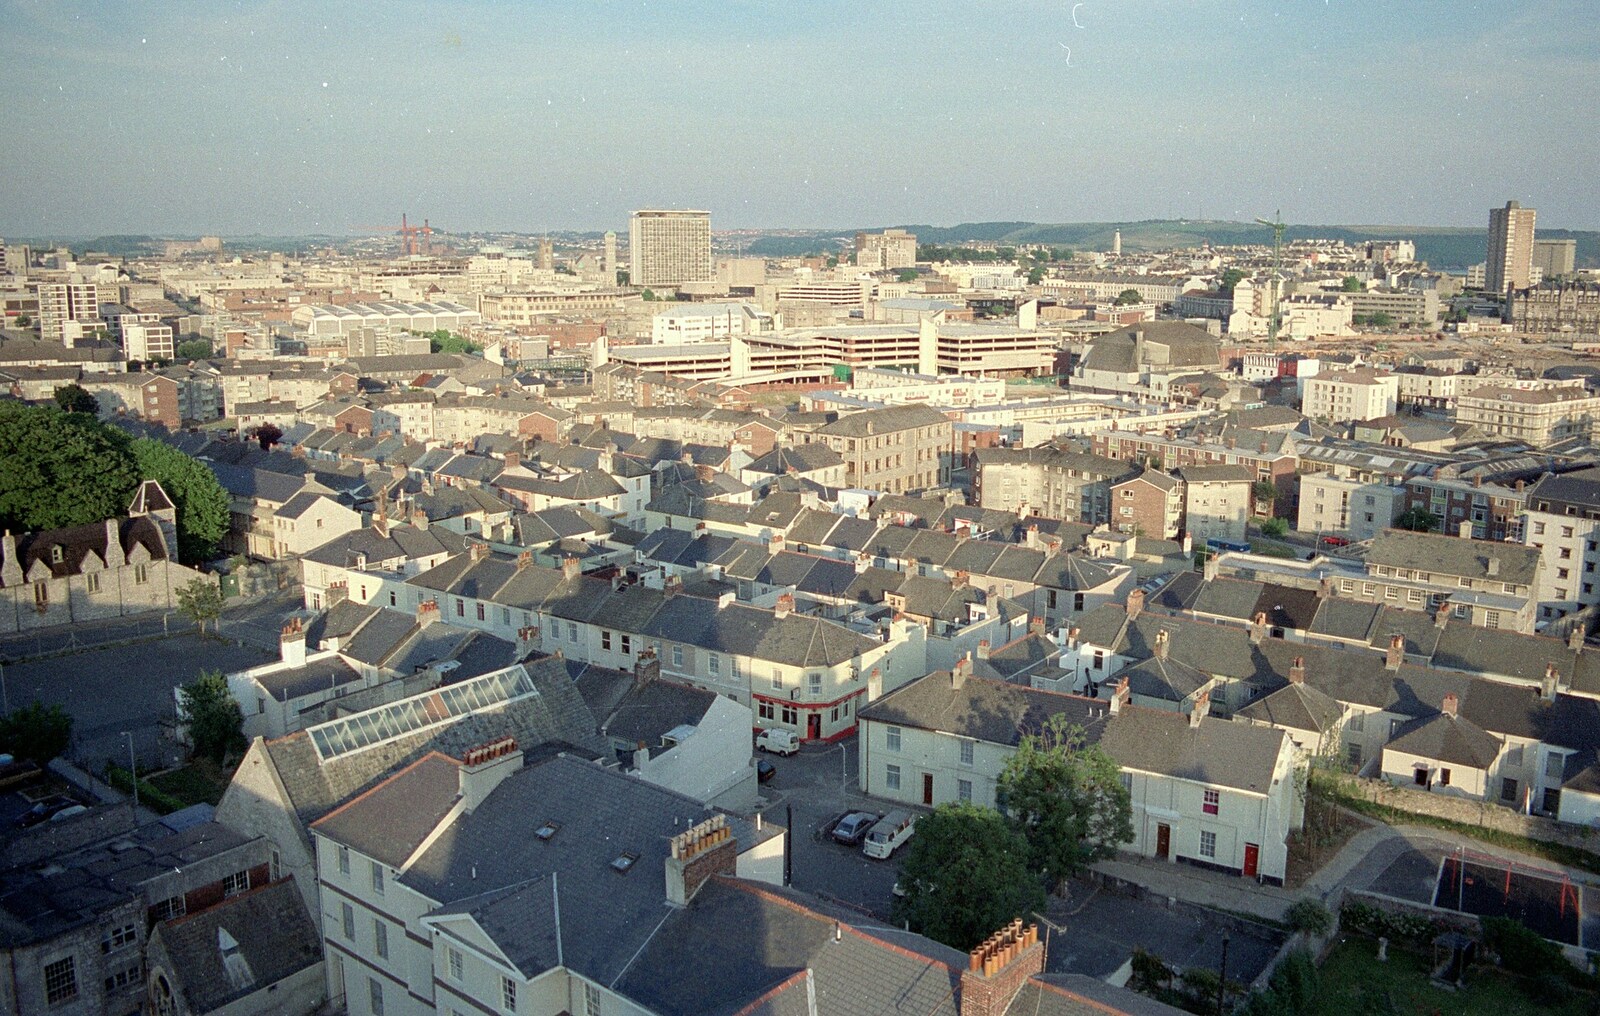 Another view towards the city centre from Uni: Views From St. Peter's Church Tower, Wyndham Square, Plymouth, Devon - 15th June 1989